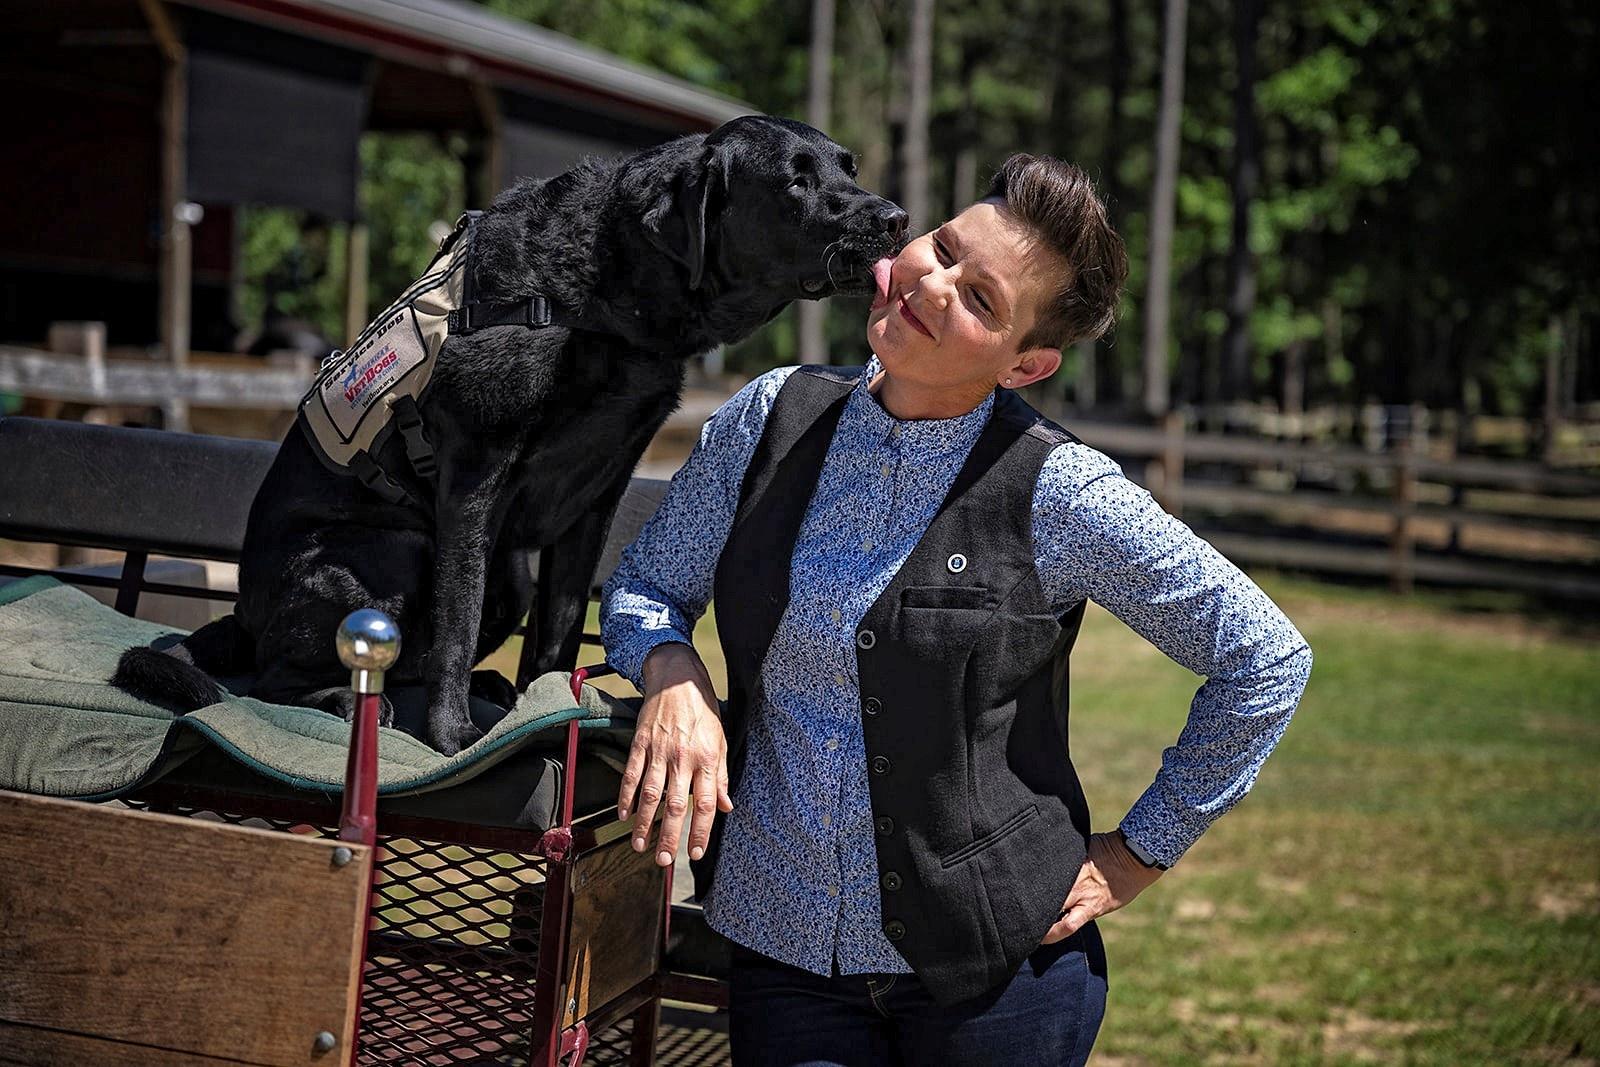 America’s VetDog Charlie gives “After Action” host Stacy Pearsall an affectionate kiss 